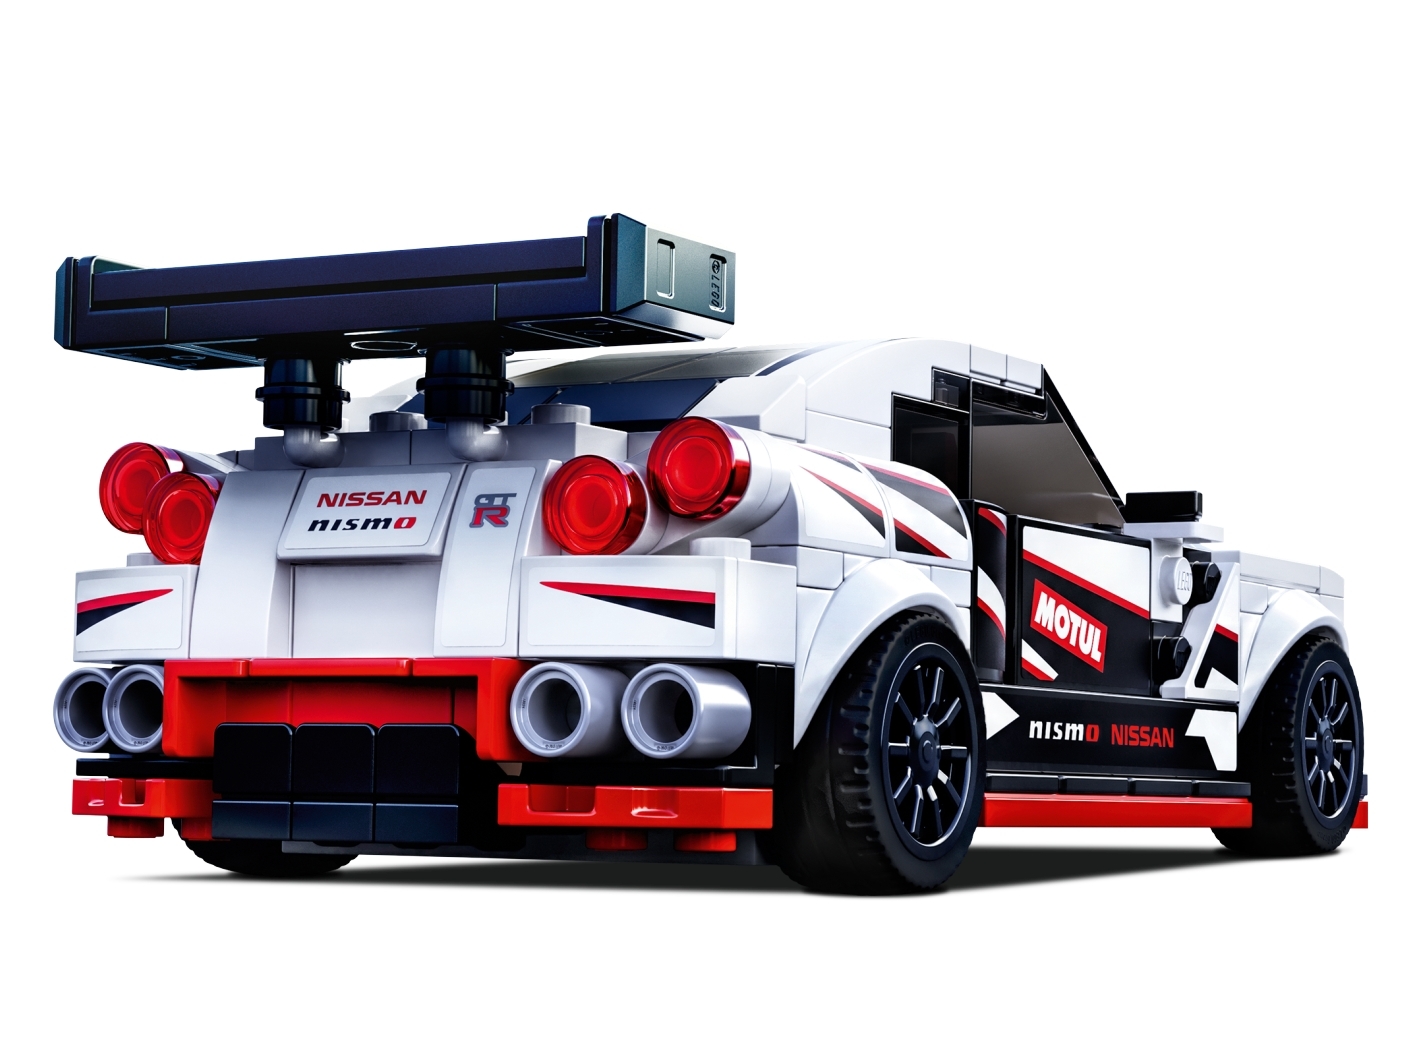 for sale online LEGO Nissan GT-R NISMO Speed Champions 76896 